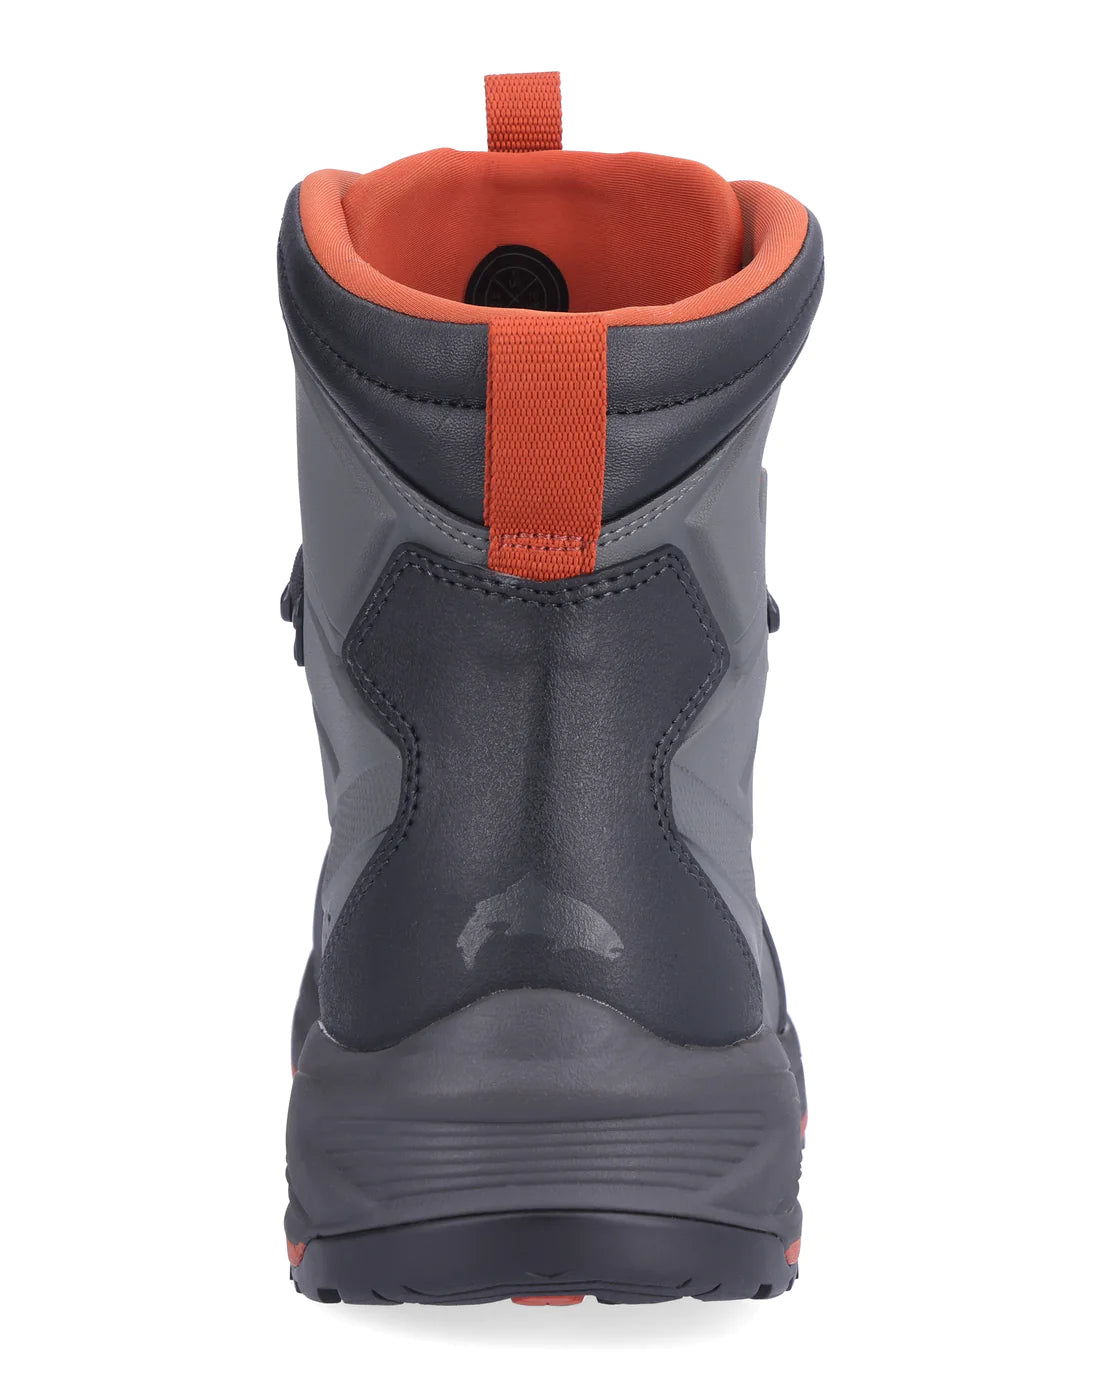 Simms Freestone Wading Boot -  - Mansfield Hunting & Fishing - Products to prepare for Corona Virus